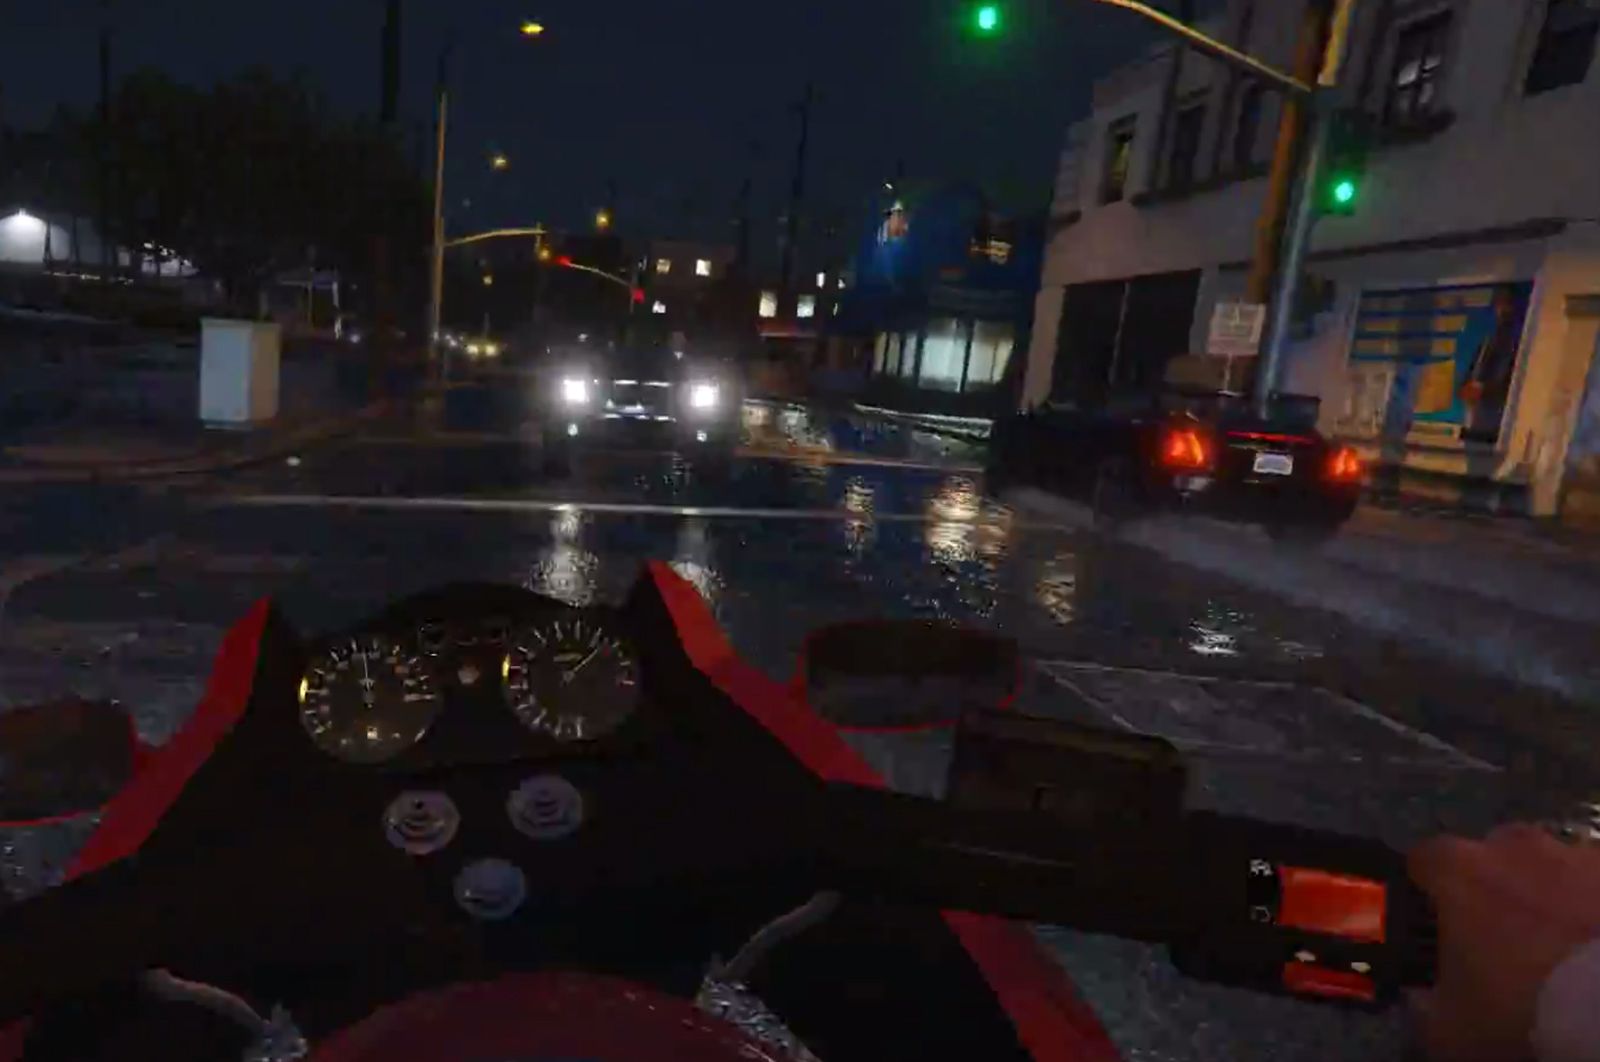 GTA 5 Xbox One/PS4/PC Has First-Person Mode - GameSpot